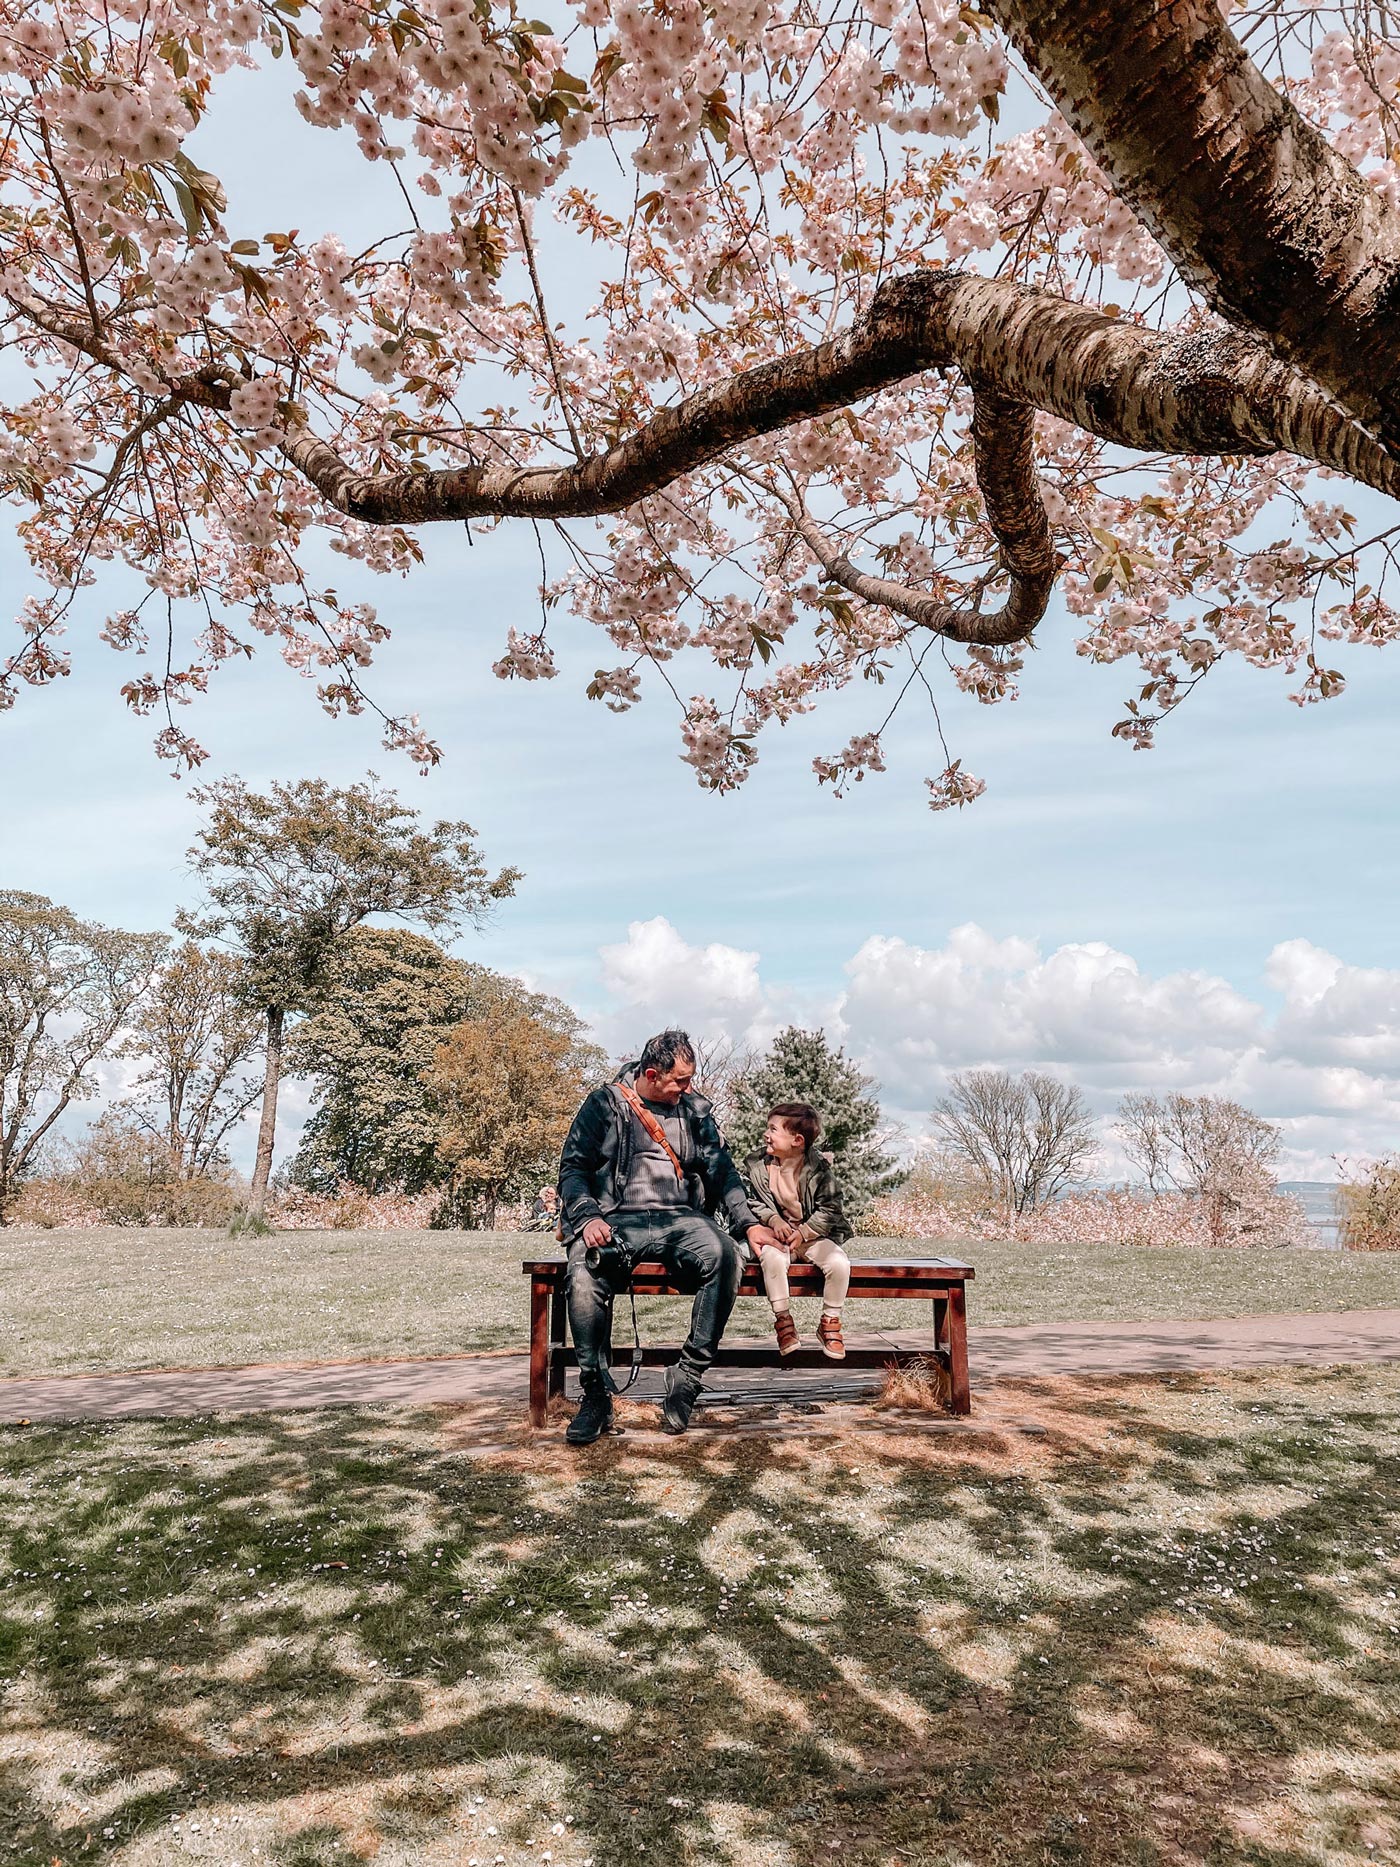 Max and Terry underneath a cherry blossom tree, May 2021